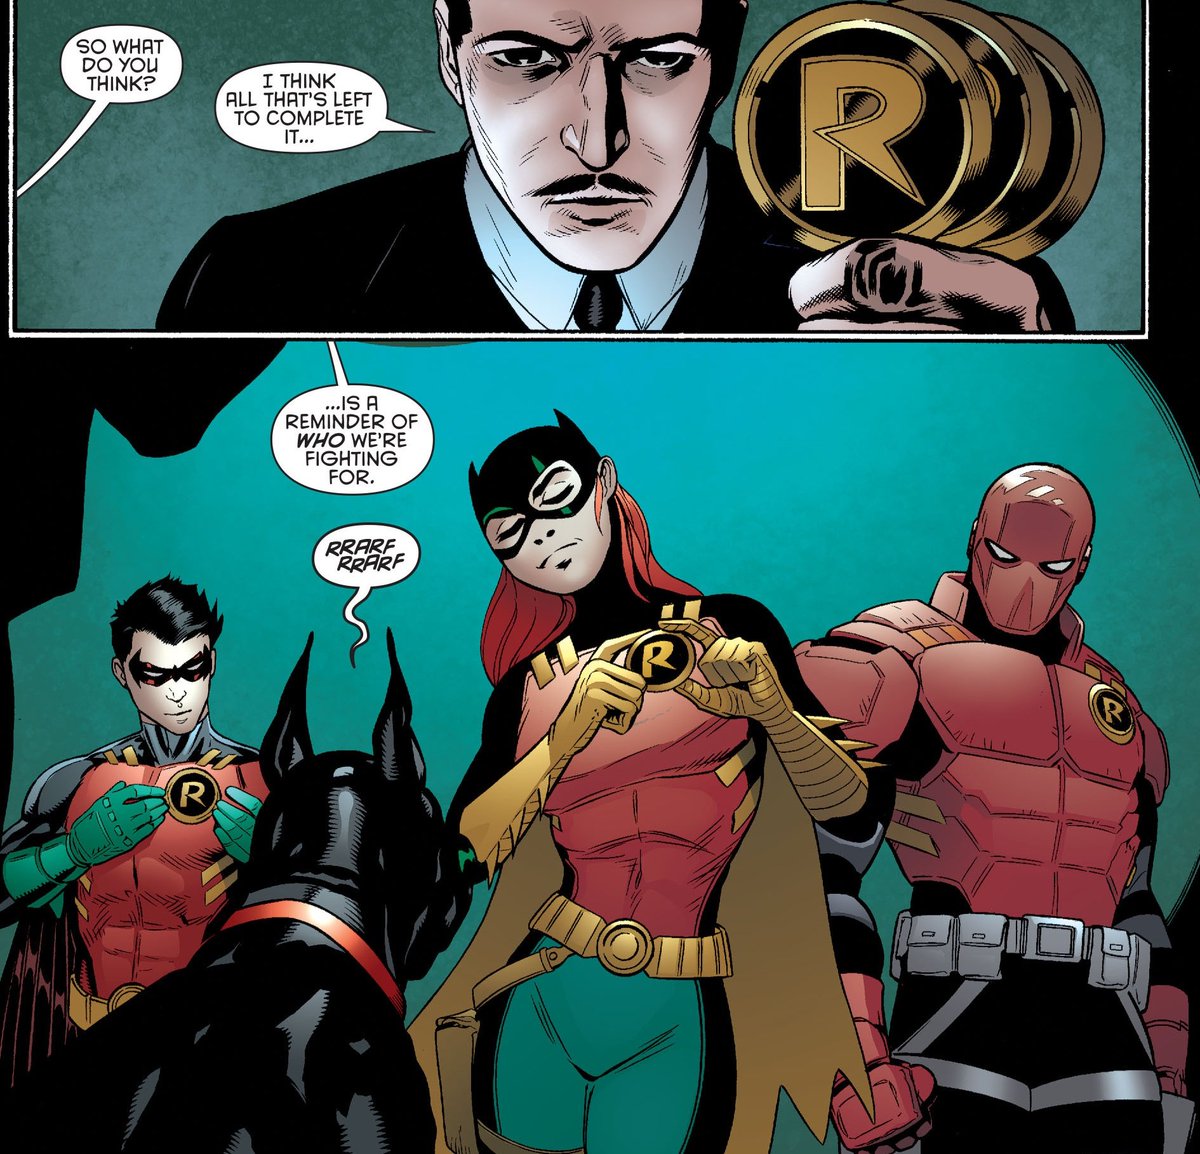 It was really sweet that they all donned Robin costumes when they went to get Damian's body back from Darkseid.